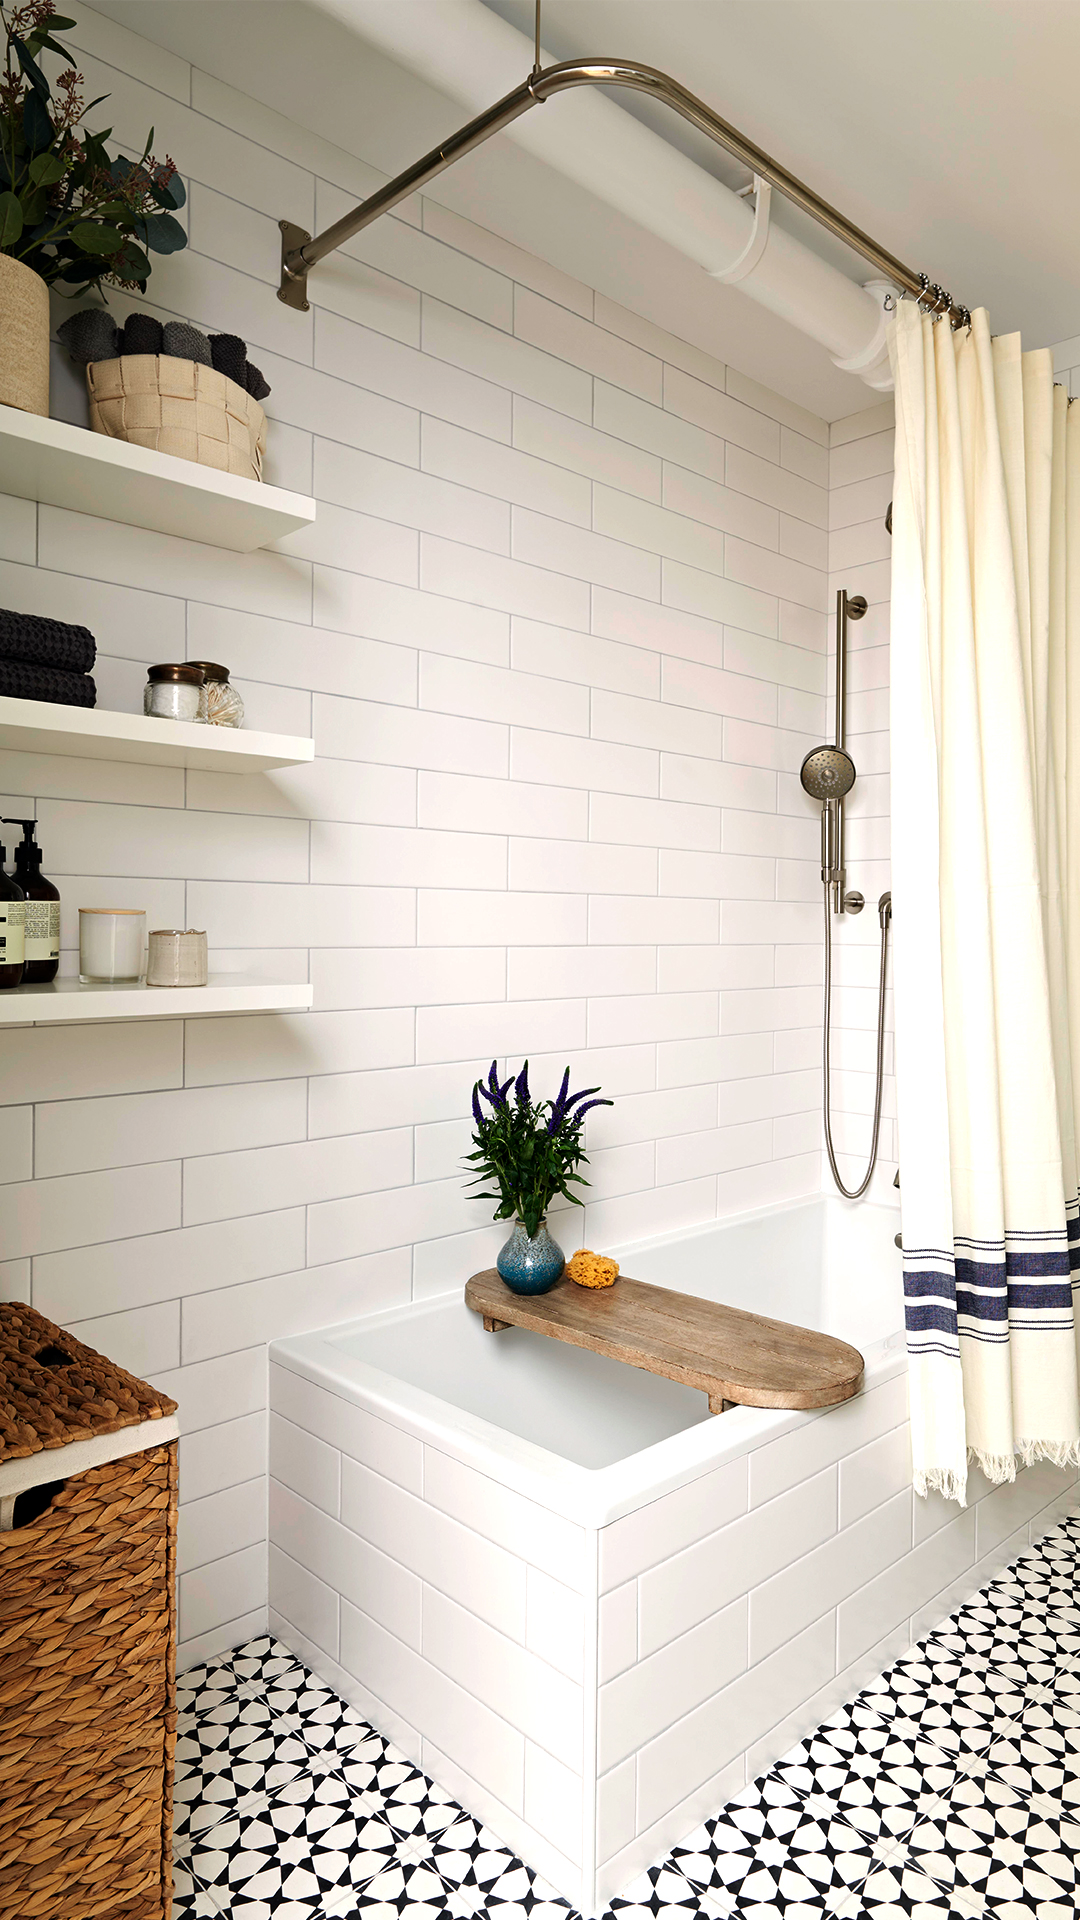 How to Use Tile for Bathroom Walls, Floors, Showers, and More